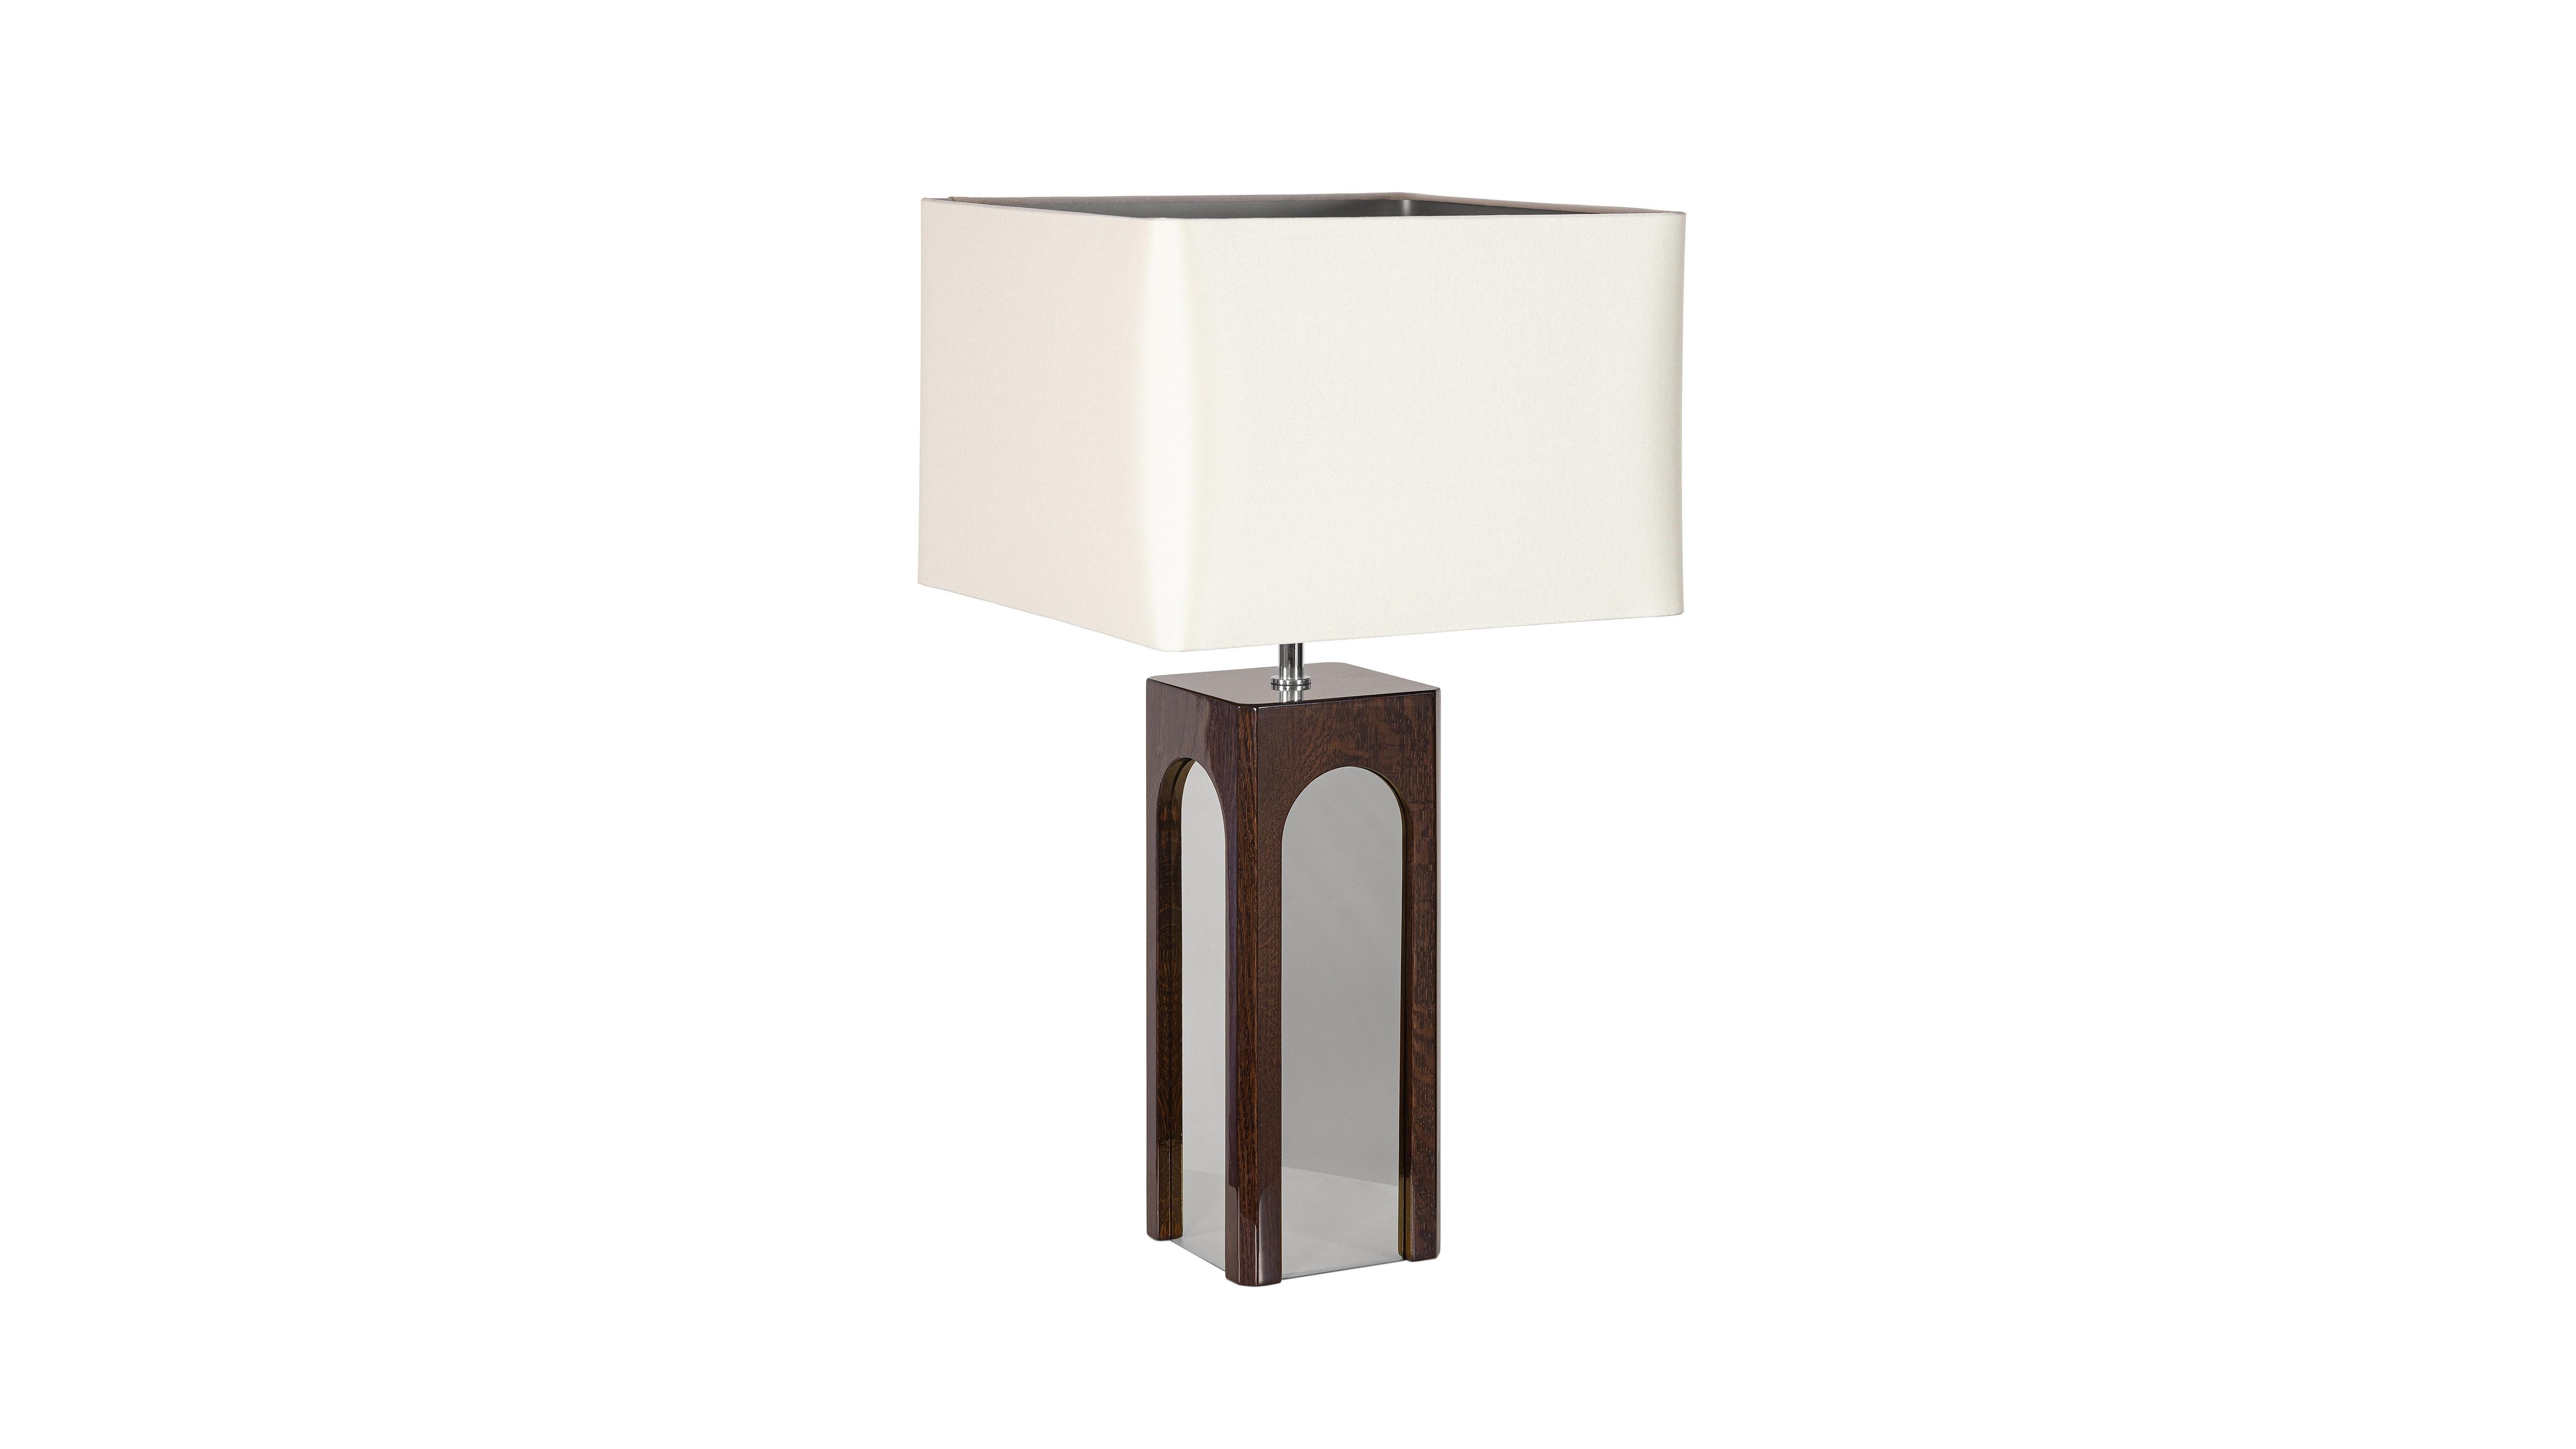 Metropolitan Oak Table Lamp by InsidherLand
Dimensions: D 35 x W 35 x H 65 cm.
Materials: Satin, wood structure with translucent dark brown in high gloss varnish and polished nickel.
4 kg.

Located in New York, USA, the Lincoln square is famous for